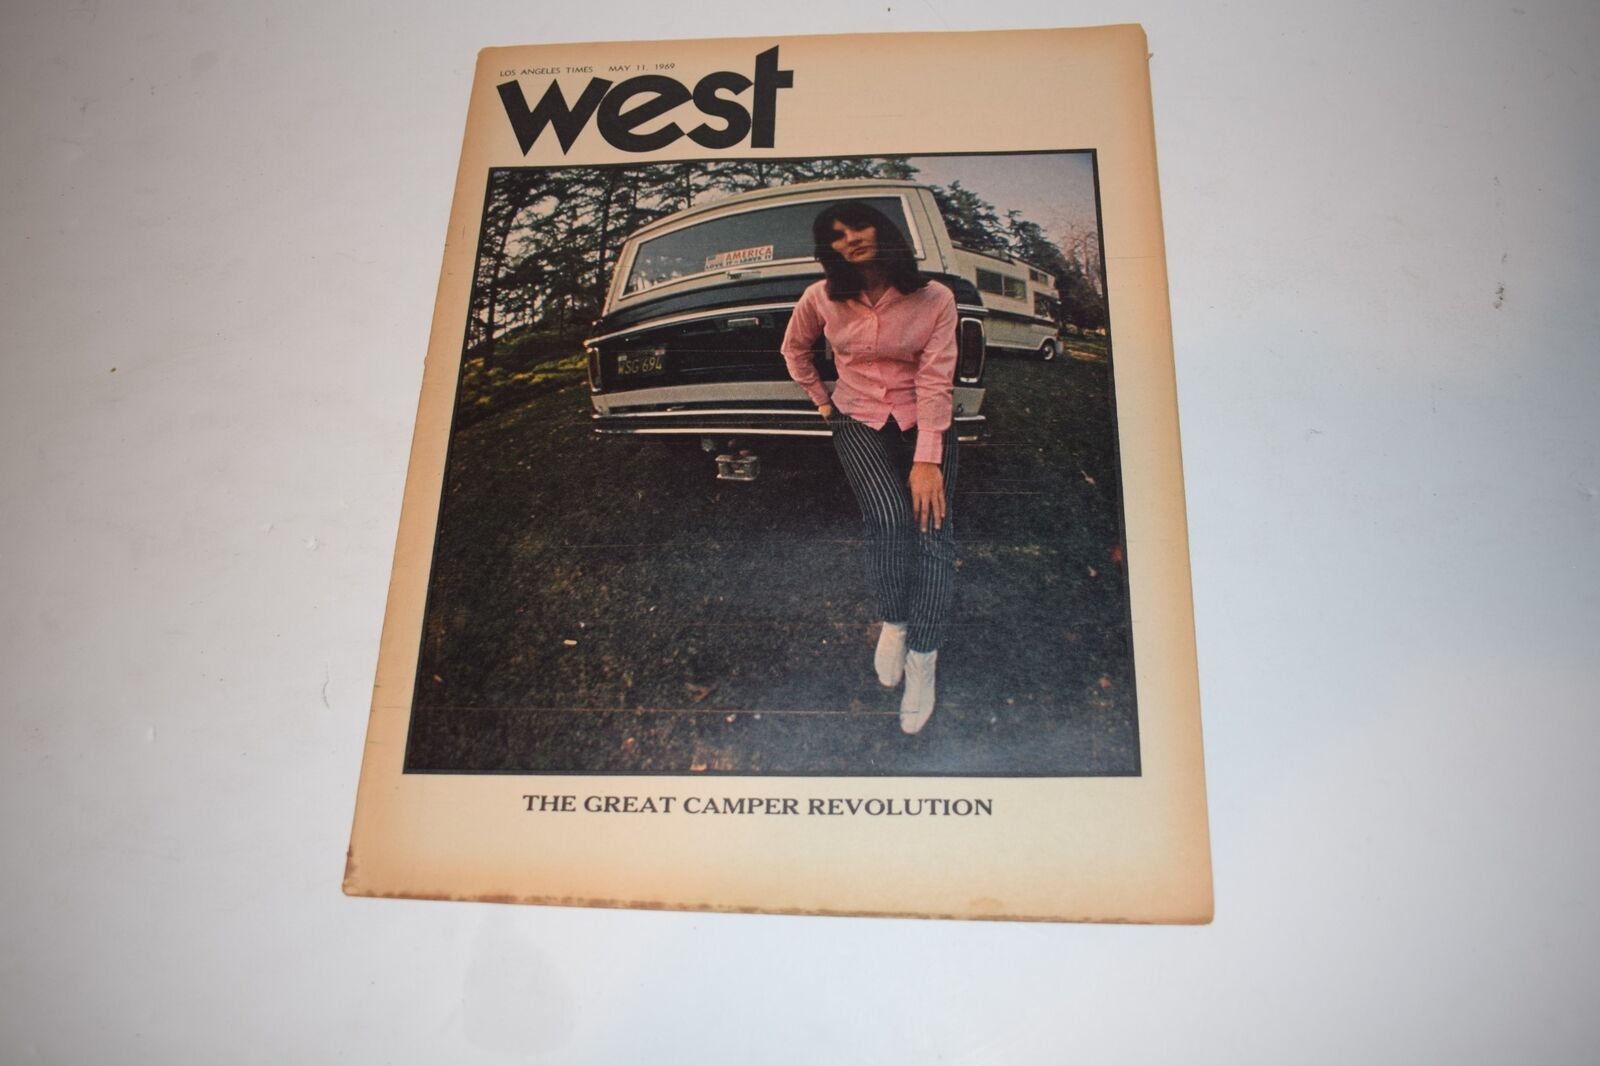 Los Angeles Times WEST Magazine -GREAT CAMPER REVOLUTION MAY 11 1969  (MPF67)